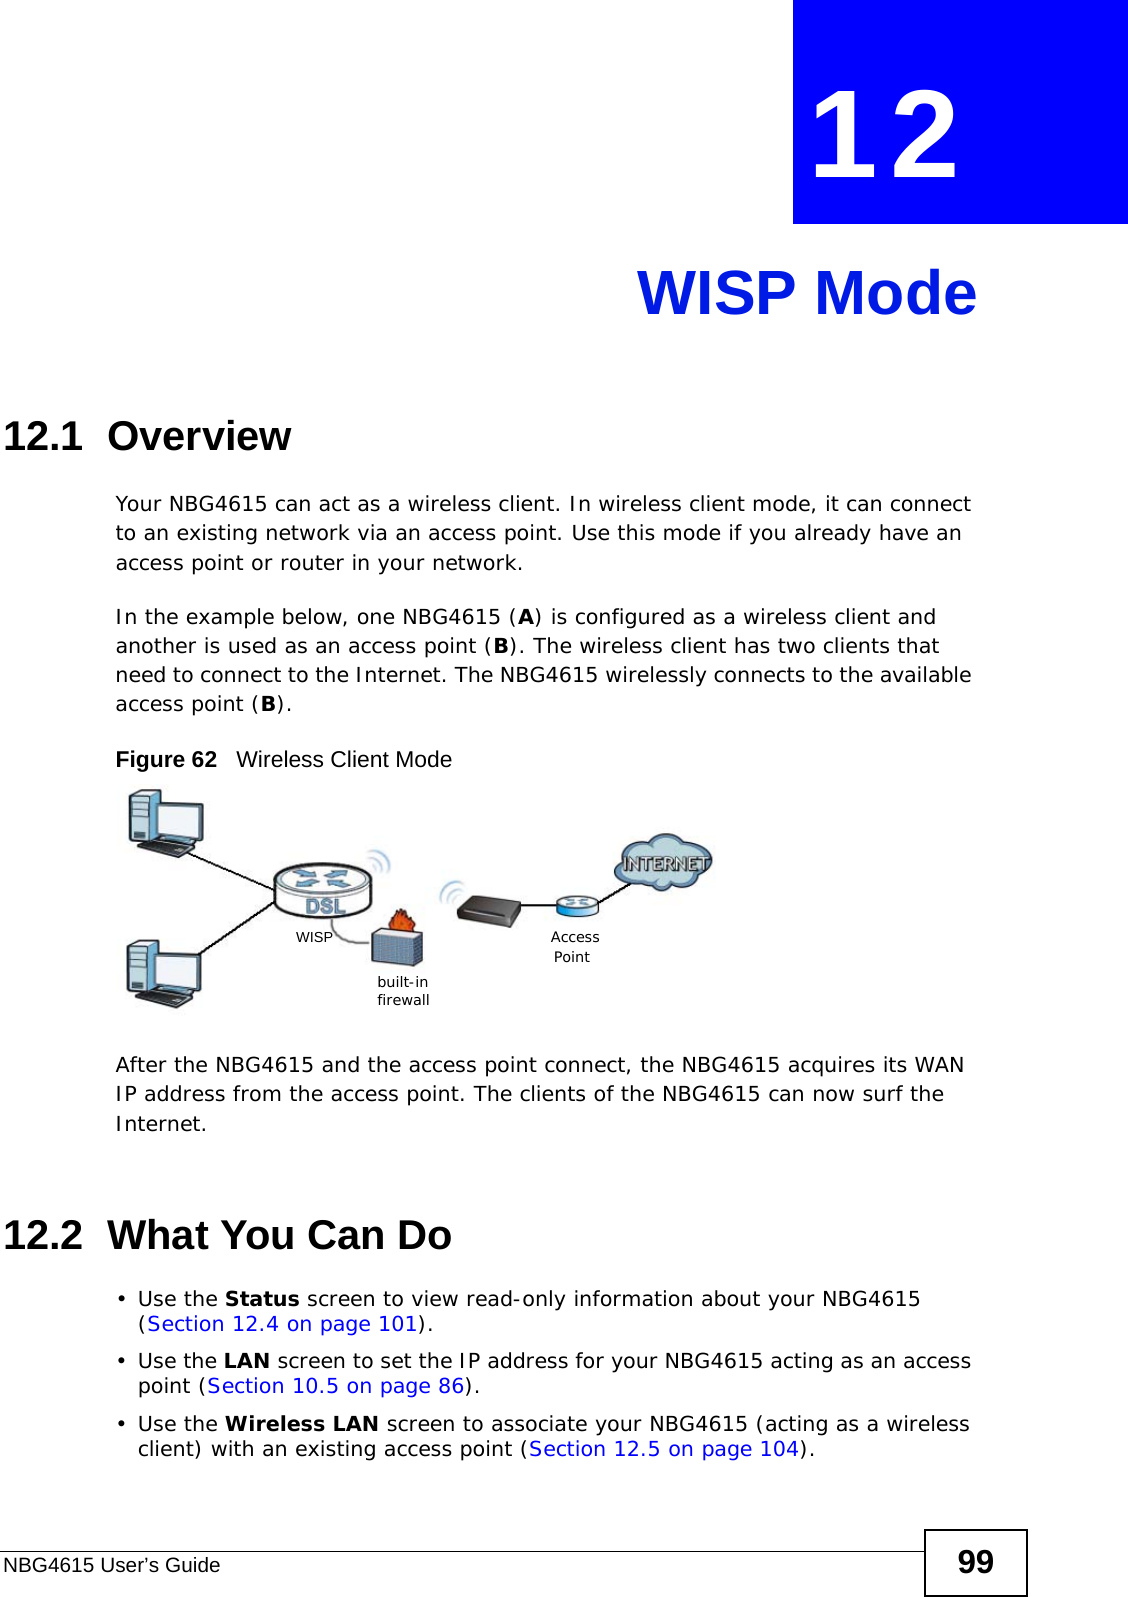 NBG4615 User’s Guide 99CHAPTER  12 WISP Mode12.1  OverviewYour NBG4615 can act as a wireless client. In wireless client mode, it can connect to an existing network via an access point. Use this mode if you already have an access point or router in your network.In the example below, one NBG4615 (A) is configured as a wireless client and another is used as an access point (B). The wireless client has two clients that need to connect to the Internet. The NBG4615 wirelessly connects to the available access point (B). Figure 62   Wireless Client ModeAfter the NBG4615 and the access point connect, the NBG4615 acquires its WAN IP address from the access point. The clients of the NBG4615 can now surf the Internet. 12.2  What You Can Do•Use the Status screen to view read-only information about your NBG4615 (Section 12.4 on page 101).•Use the LAN screen to set the IP address for your NBG4615 acting as an access point (Section 10.5 on page 86).•Use the Wireless LAN screen to associate your NBG4615 (acting as a wireless client) with an existing access point (Section 12.5 on page 104).built-infirewallAccessPointWISP